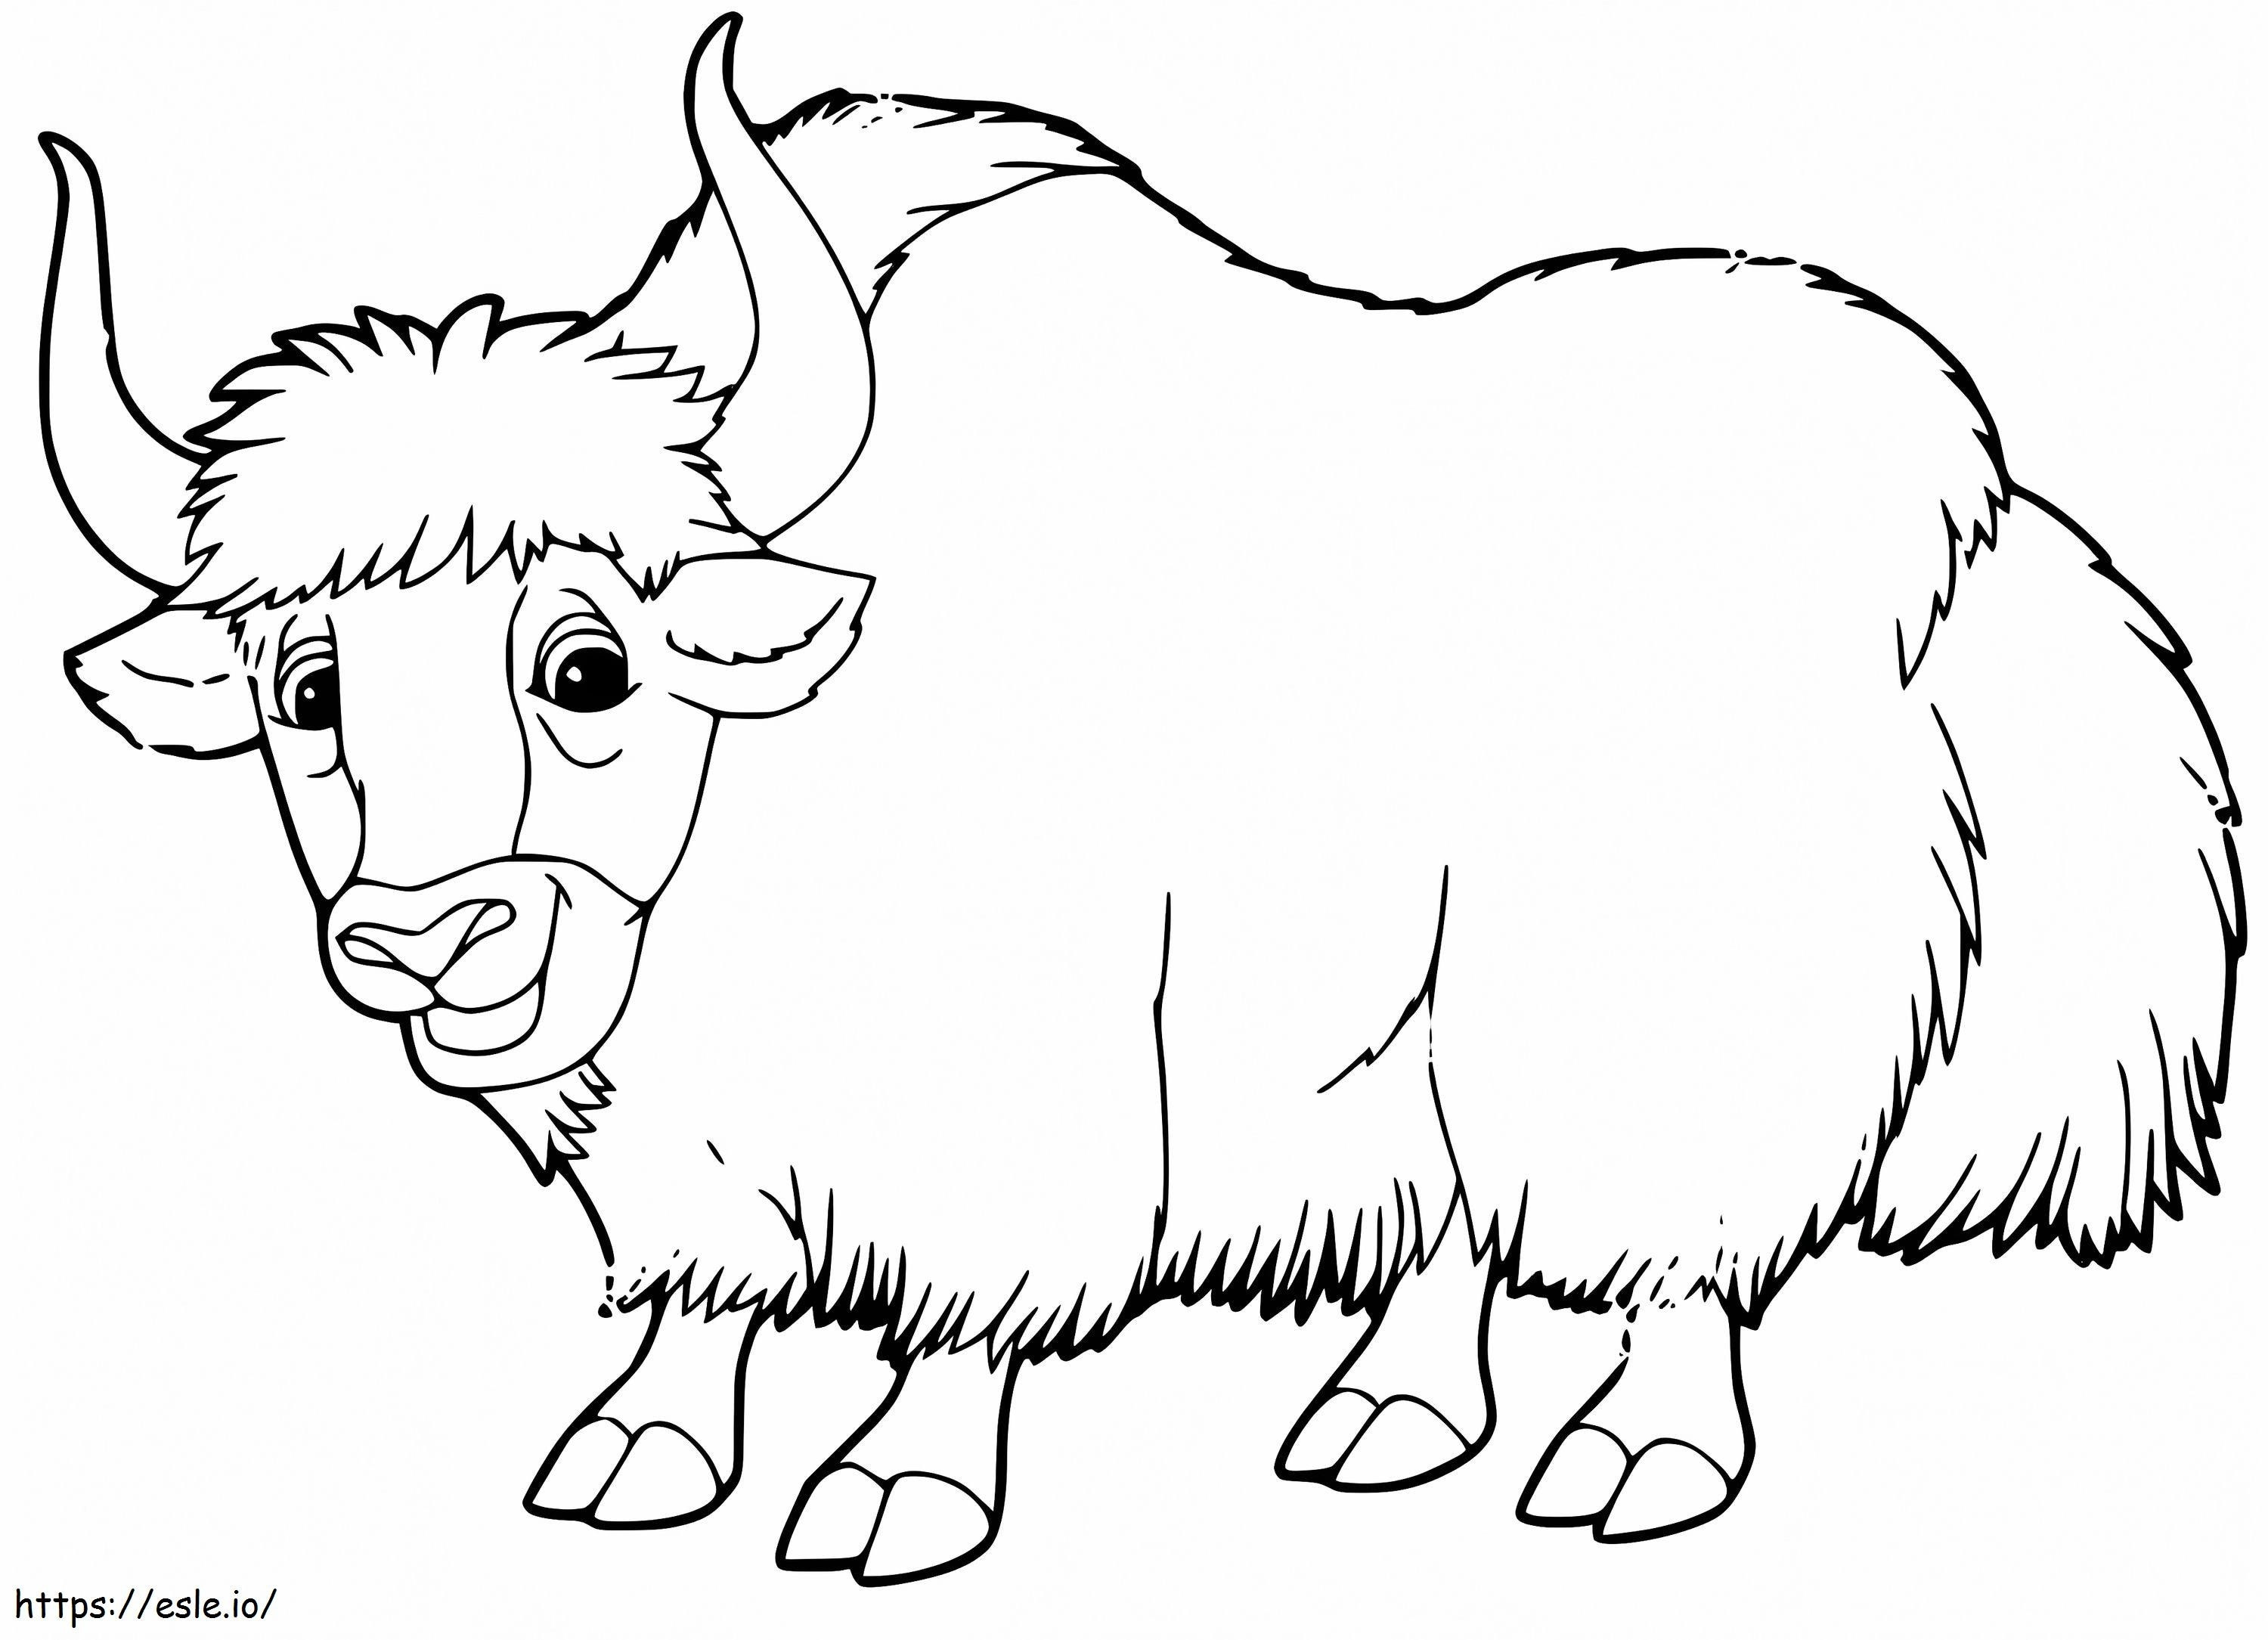 Yak Is Happy coloring page